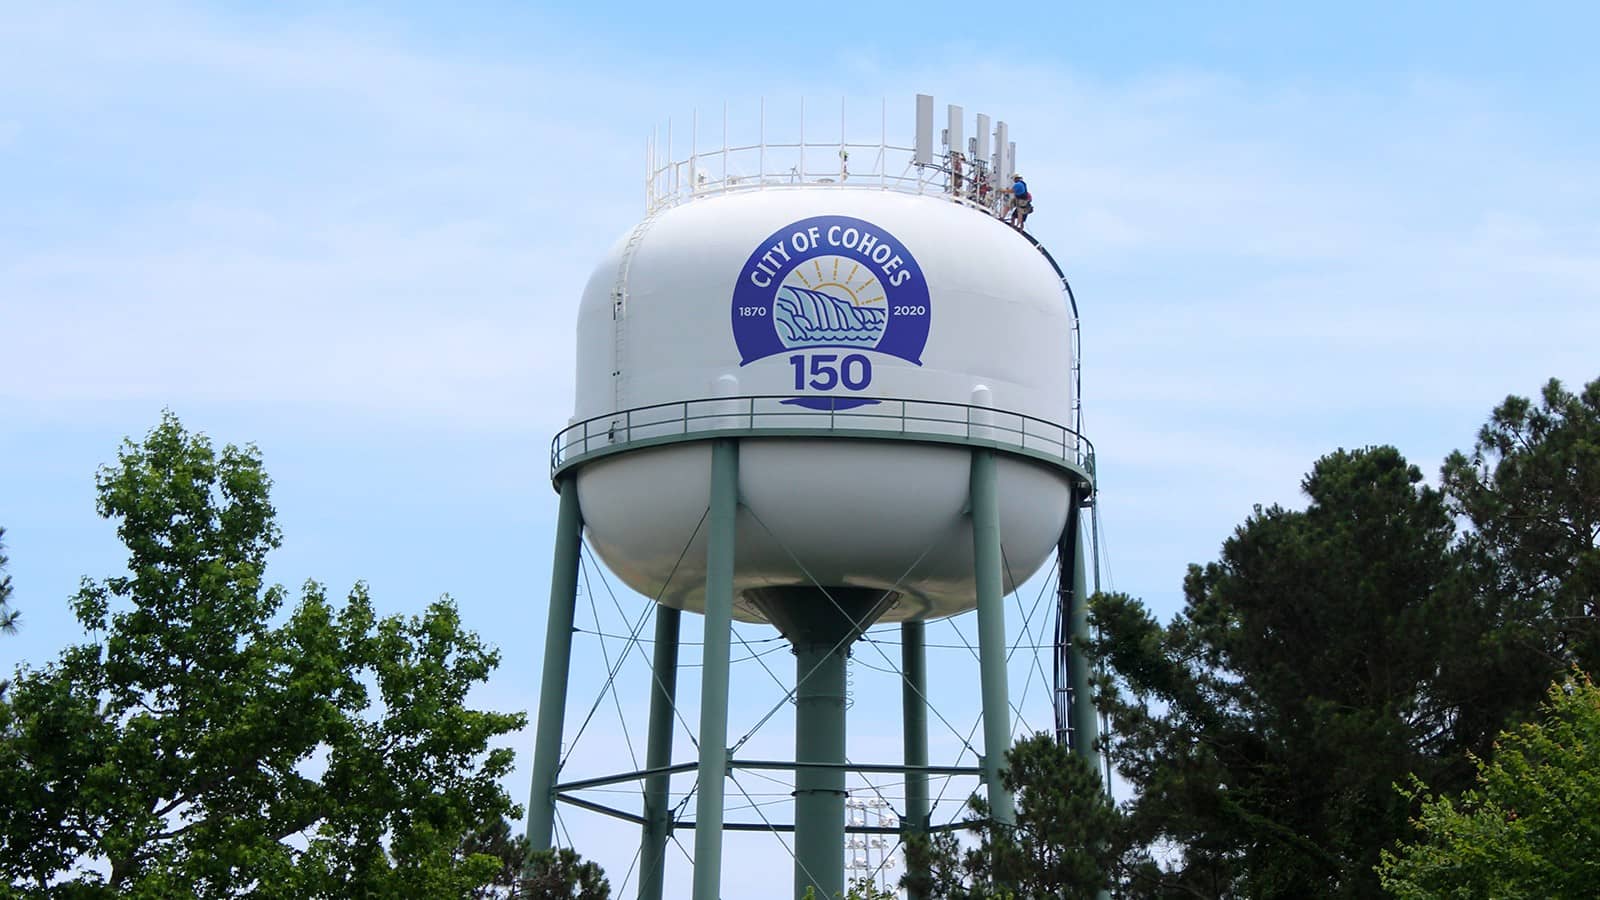 City of Cohoes | design application to Water tower